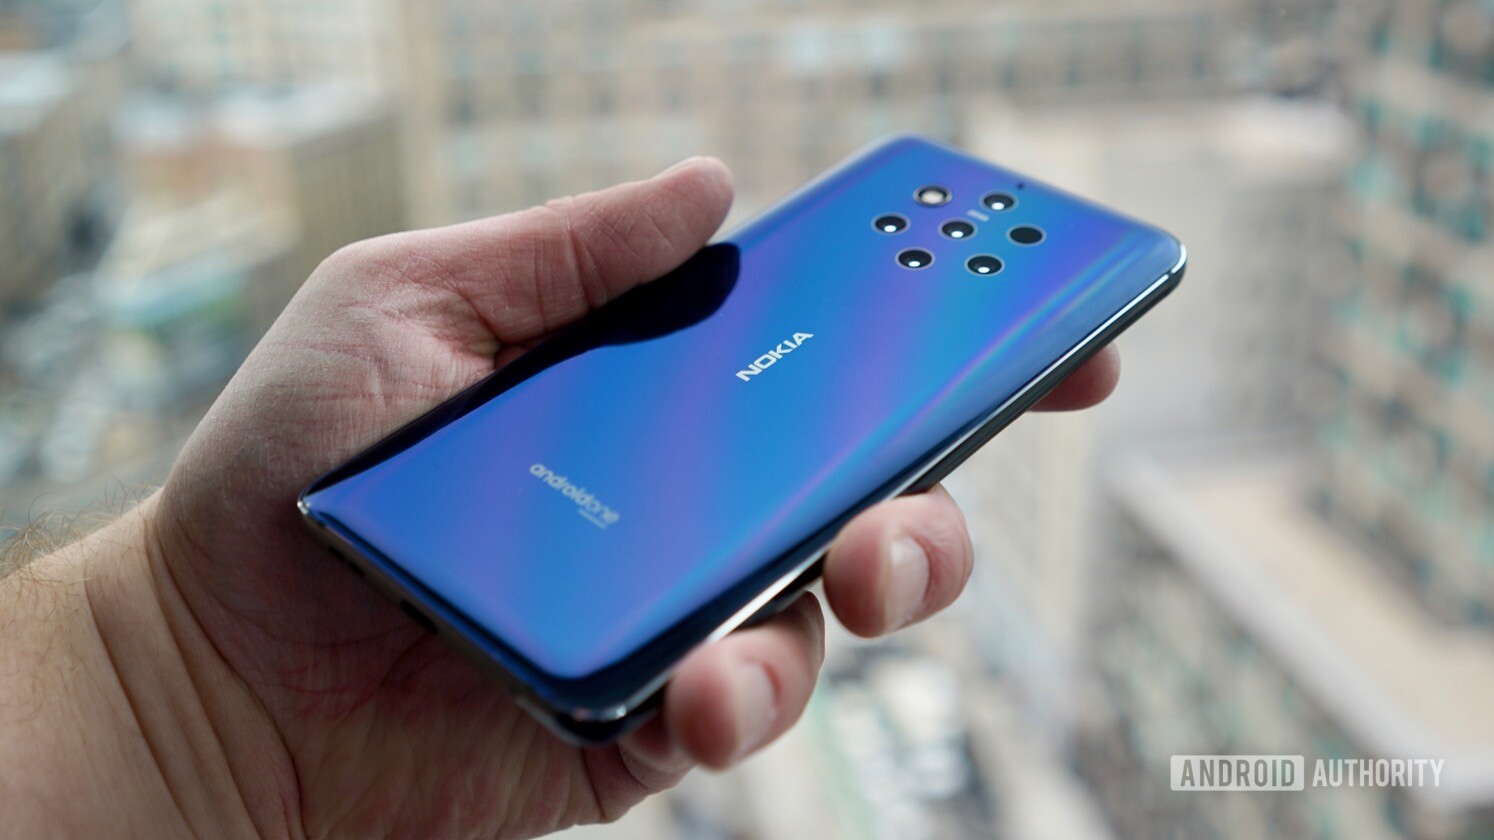 Nokia 9 PureView in hand, showing the rear of the phone